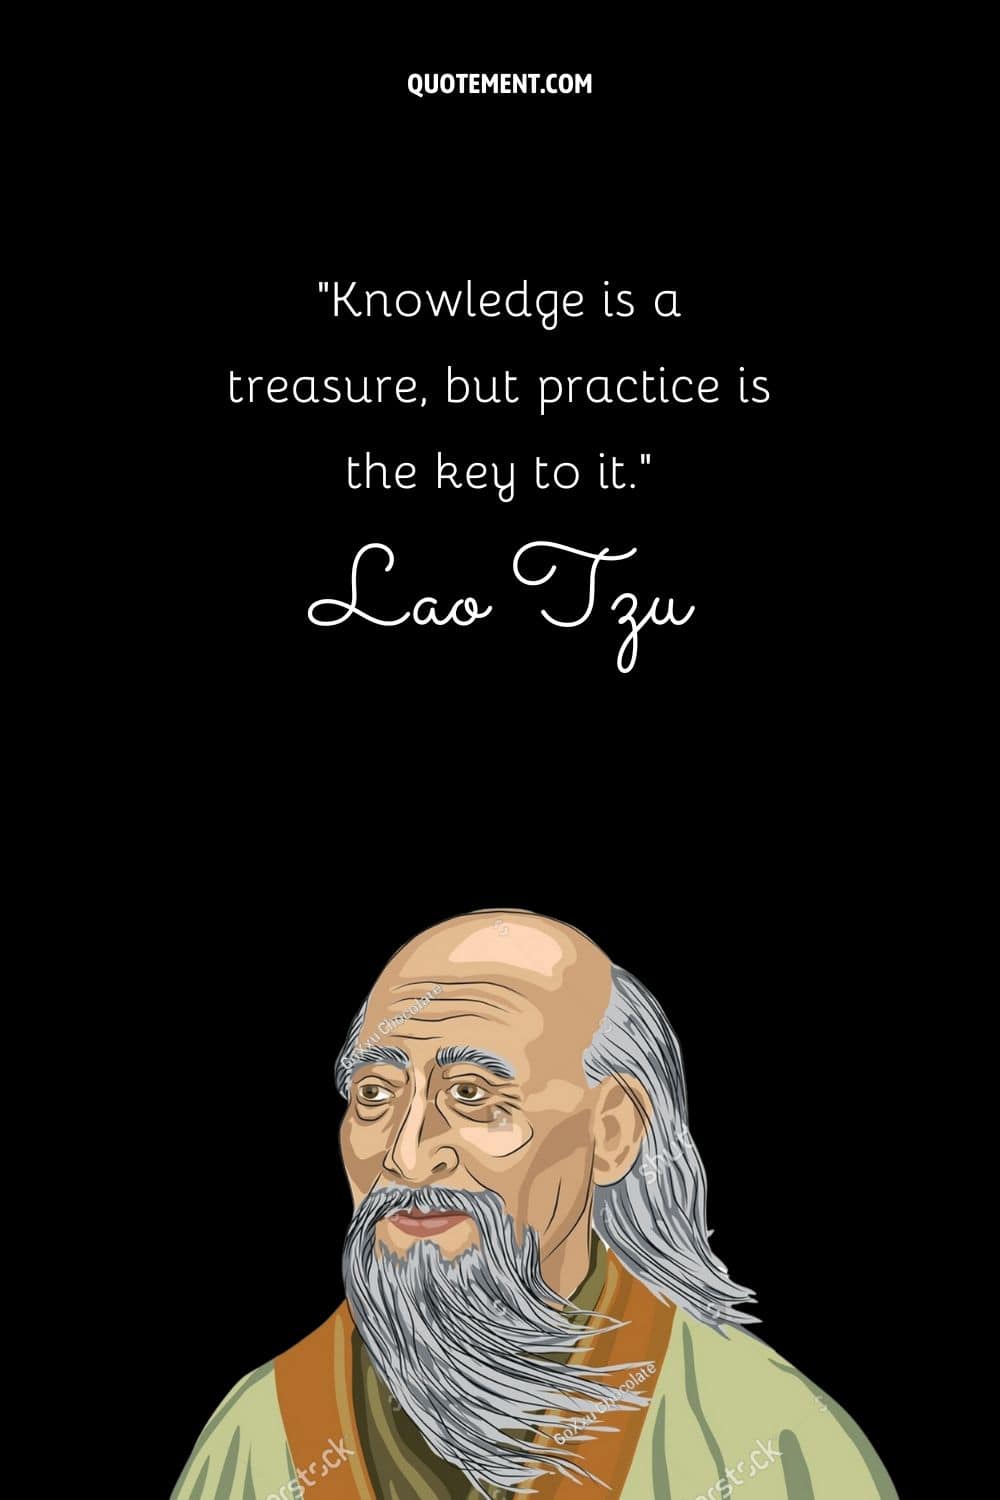 Knowledge is a treasure, but practice is the key to it.